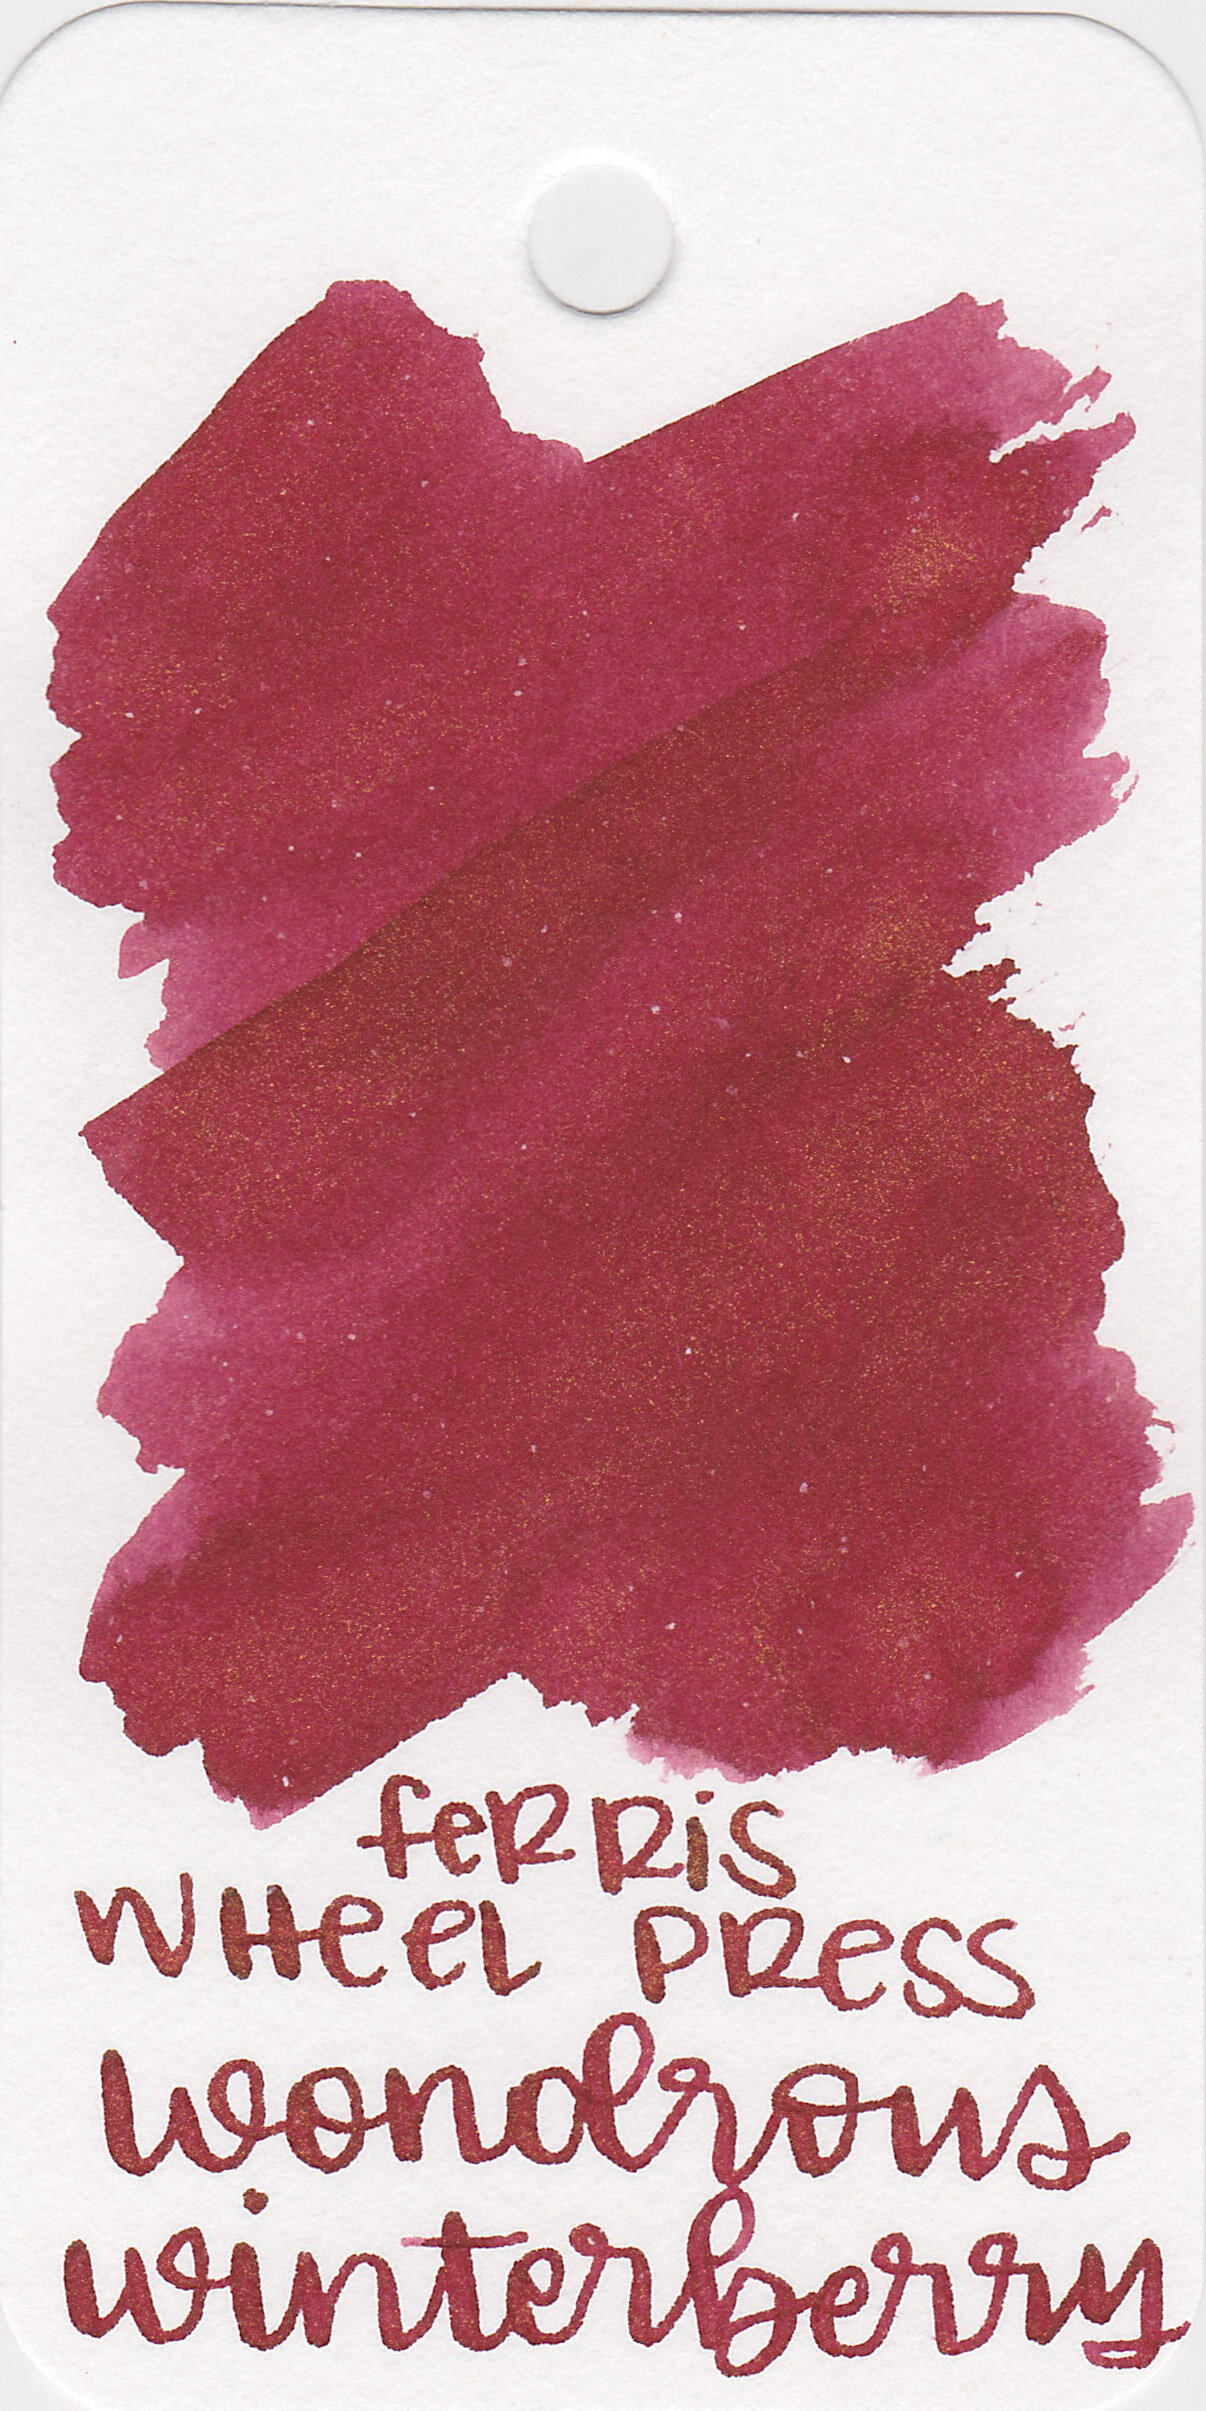 Ink Review #2396: Ferris Wheel Press Song of Scarlet — Mountain of Ink